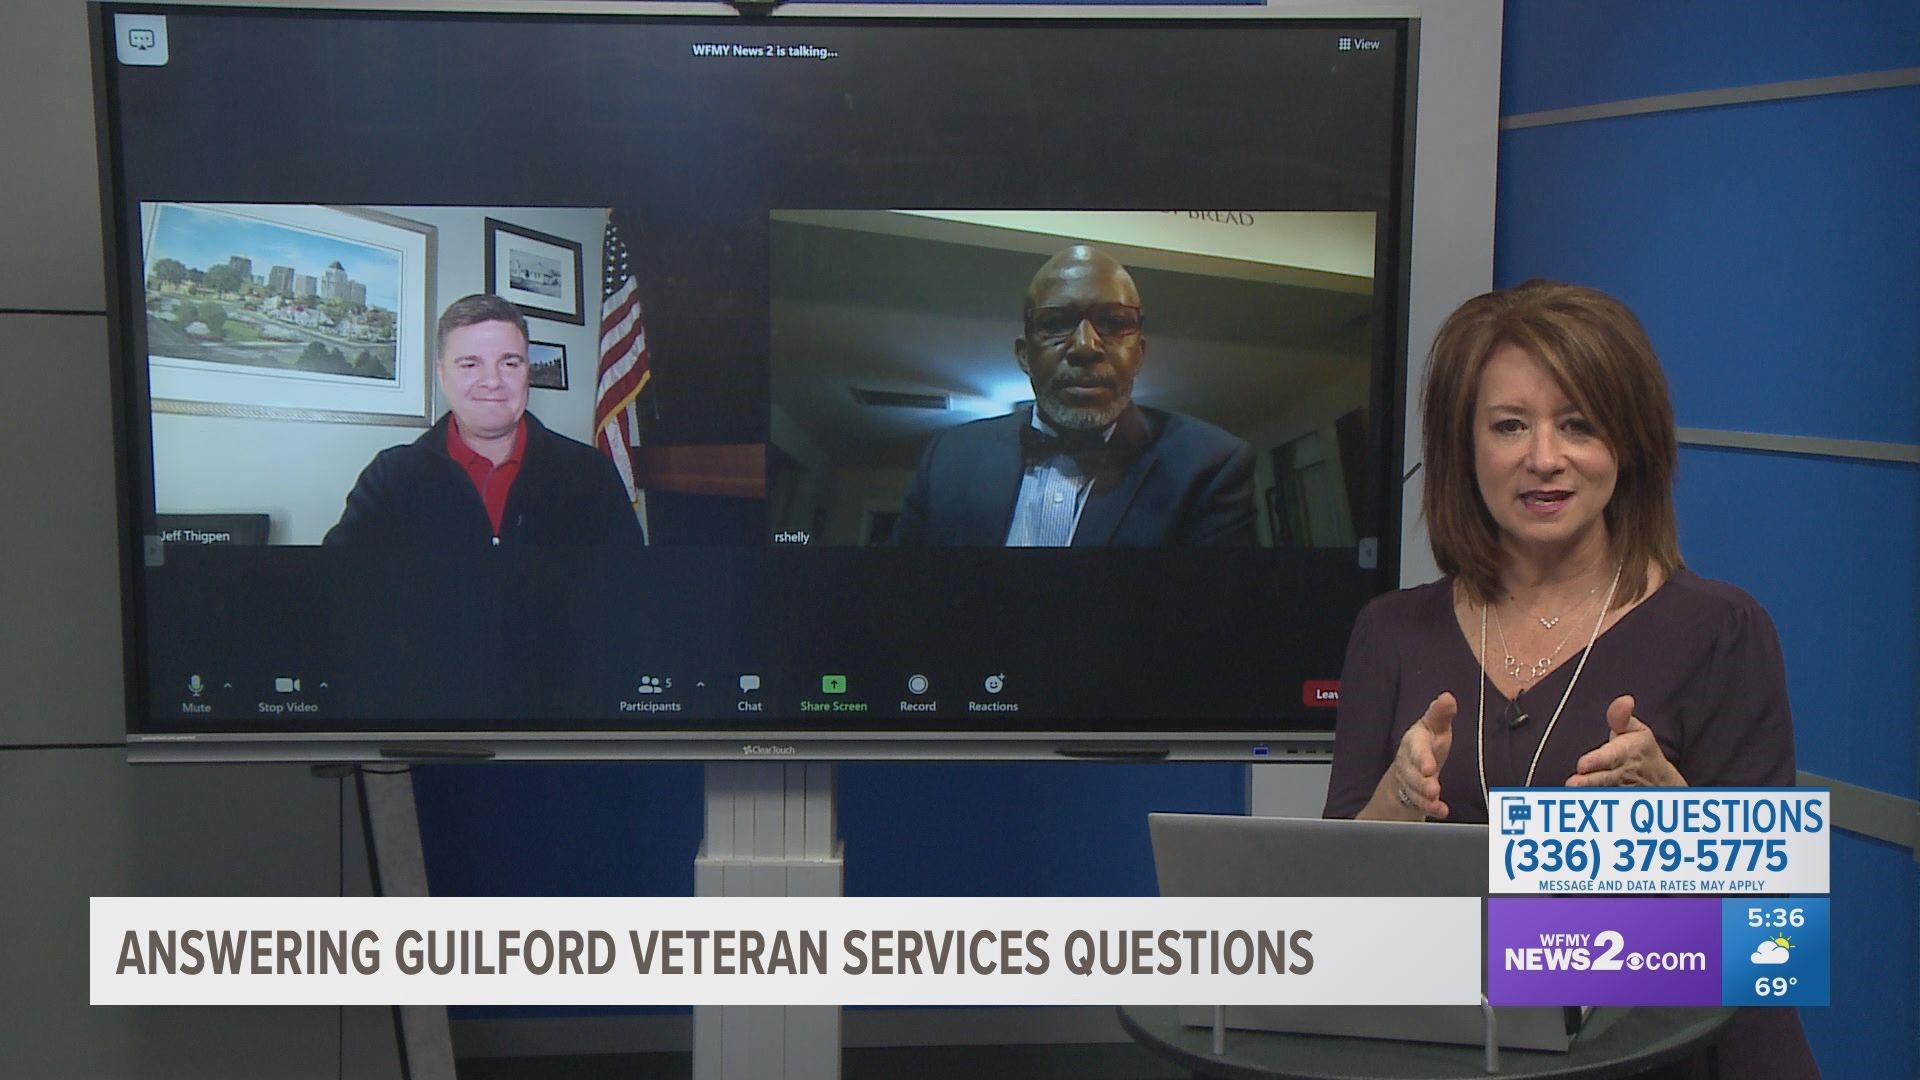 Did you know more than 400 businesses in Guilford County provide discounts for veterans?